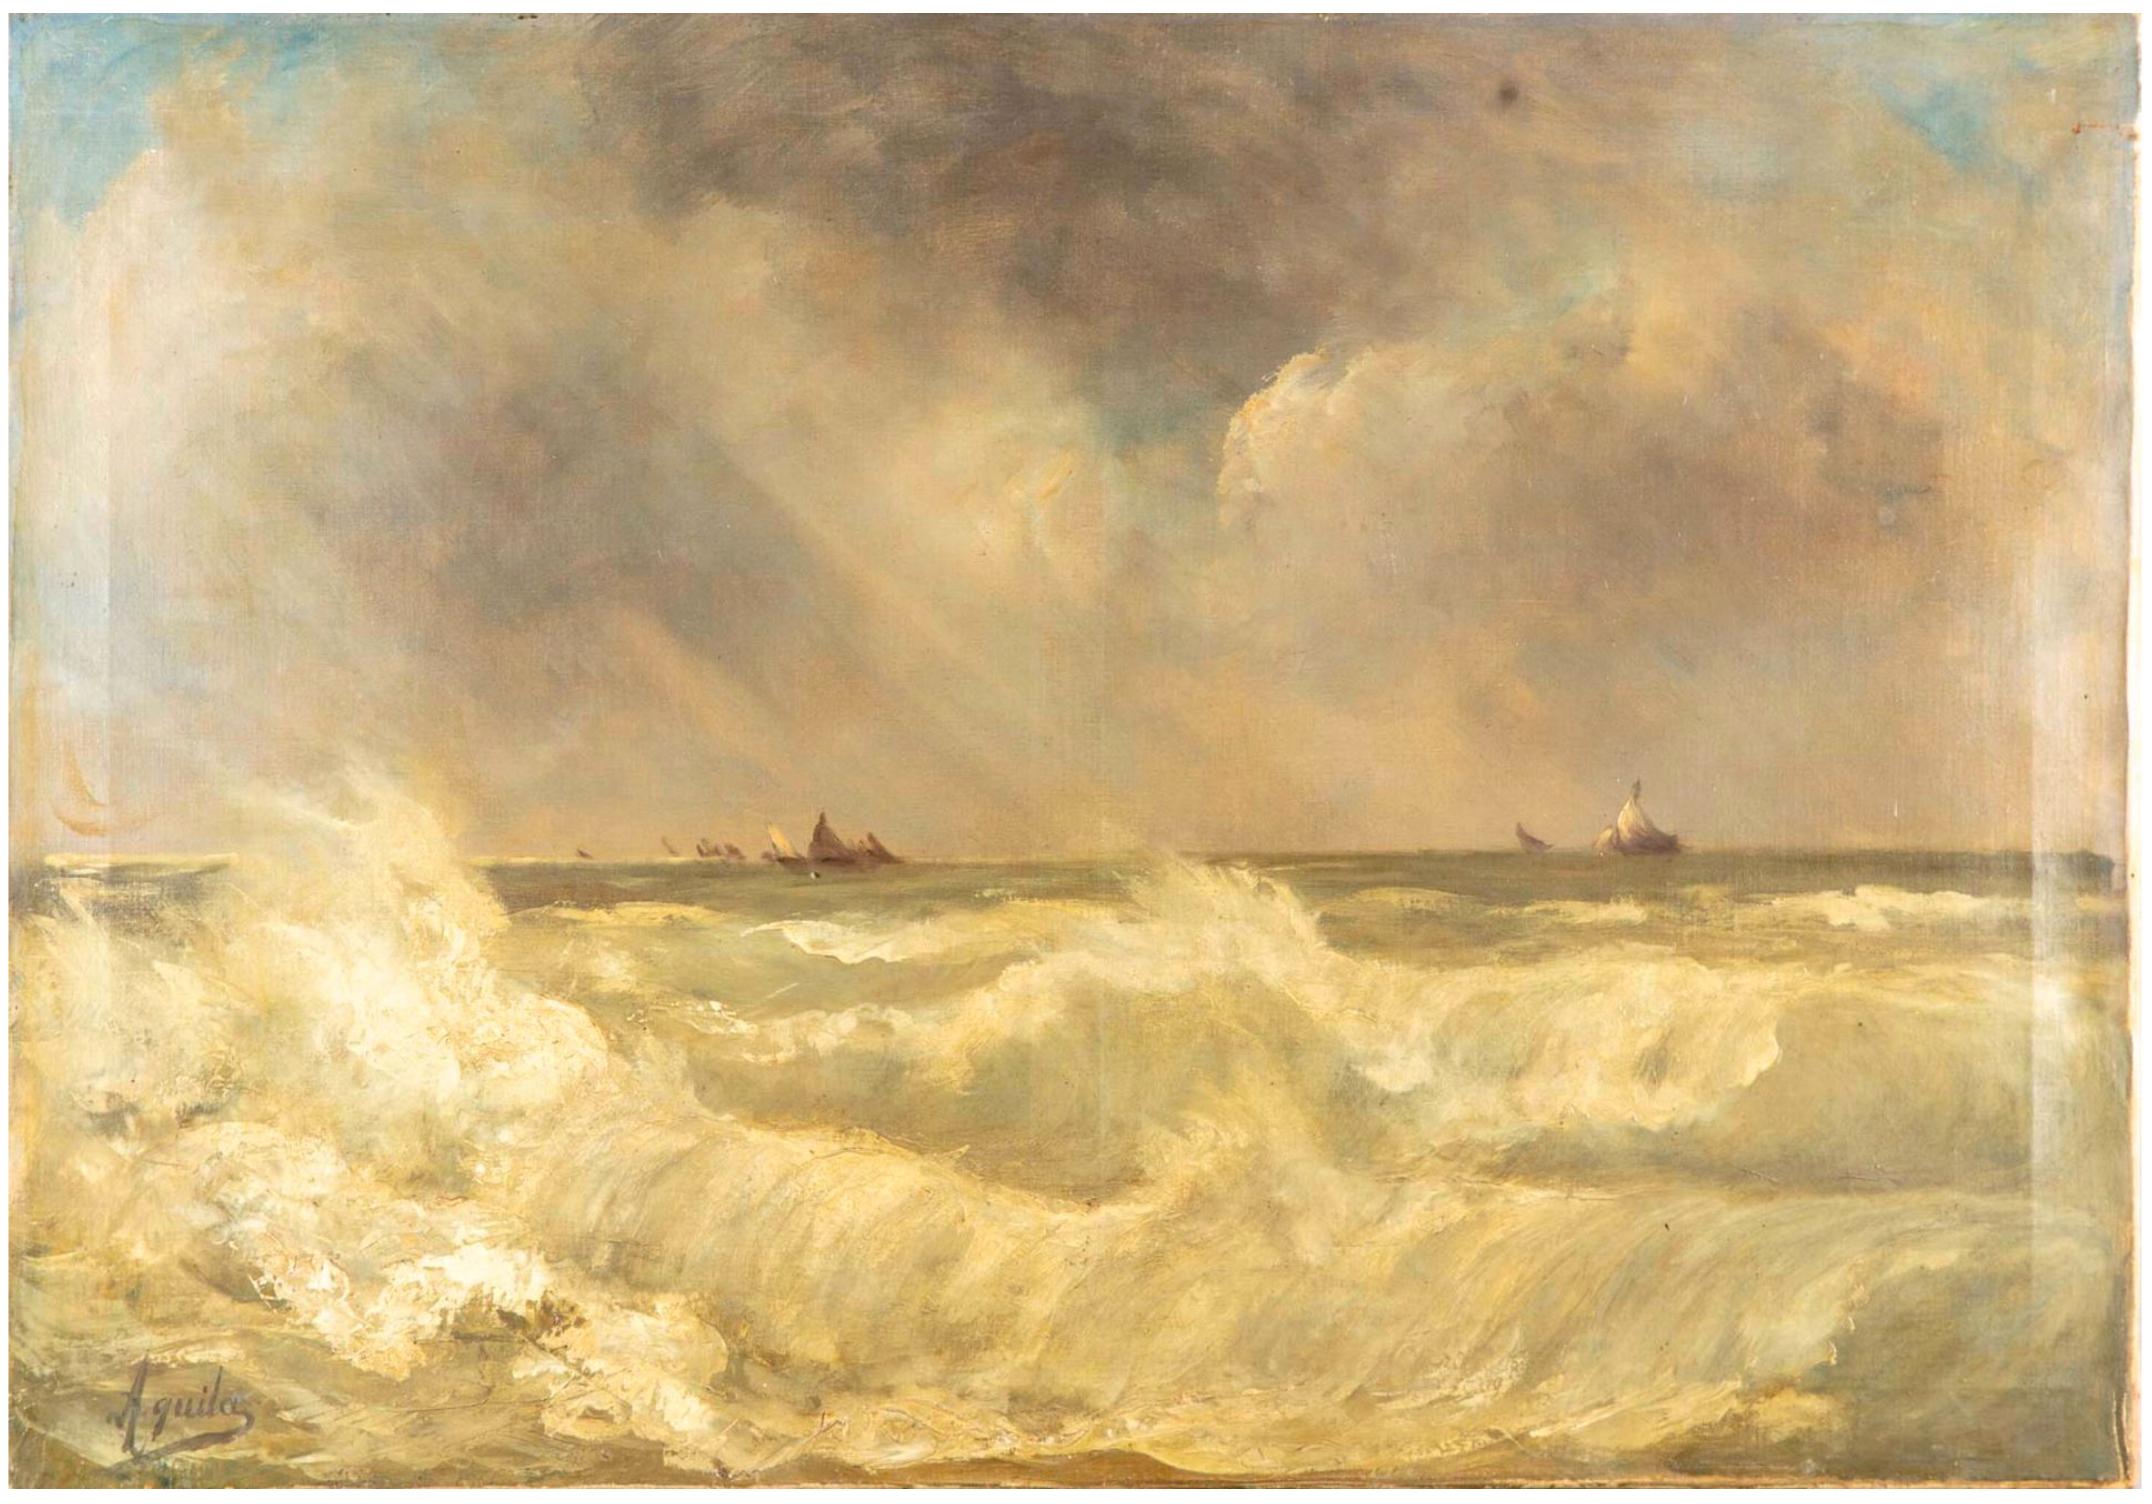 Large painting oil on canvas signed by Aquila representing the wild face of the sea.
Extremely dynamic sensation and on the other hand one my see few small boats in a distance away from the huge waives.

France, circa 1920.